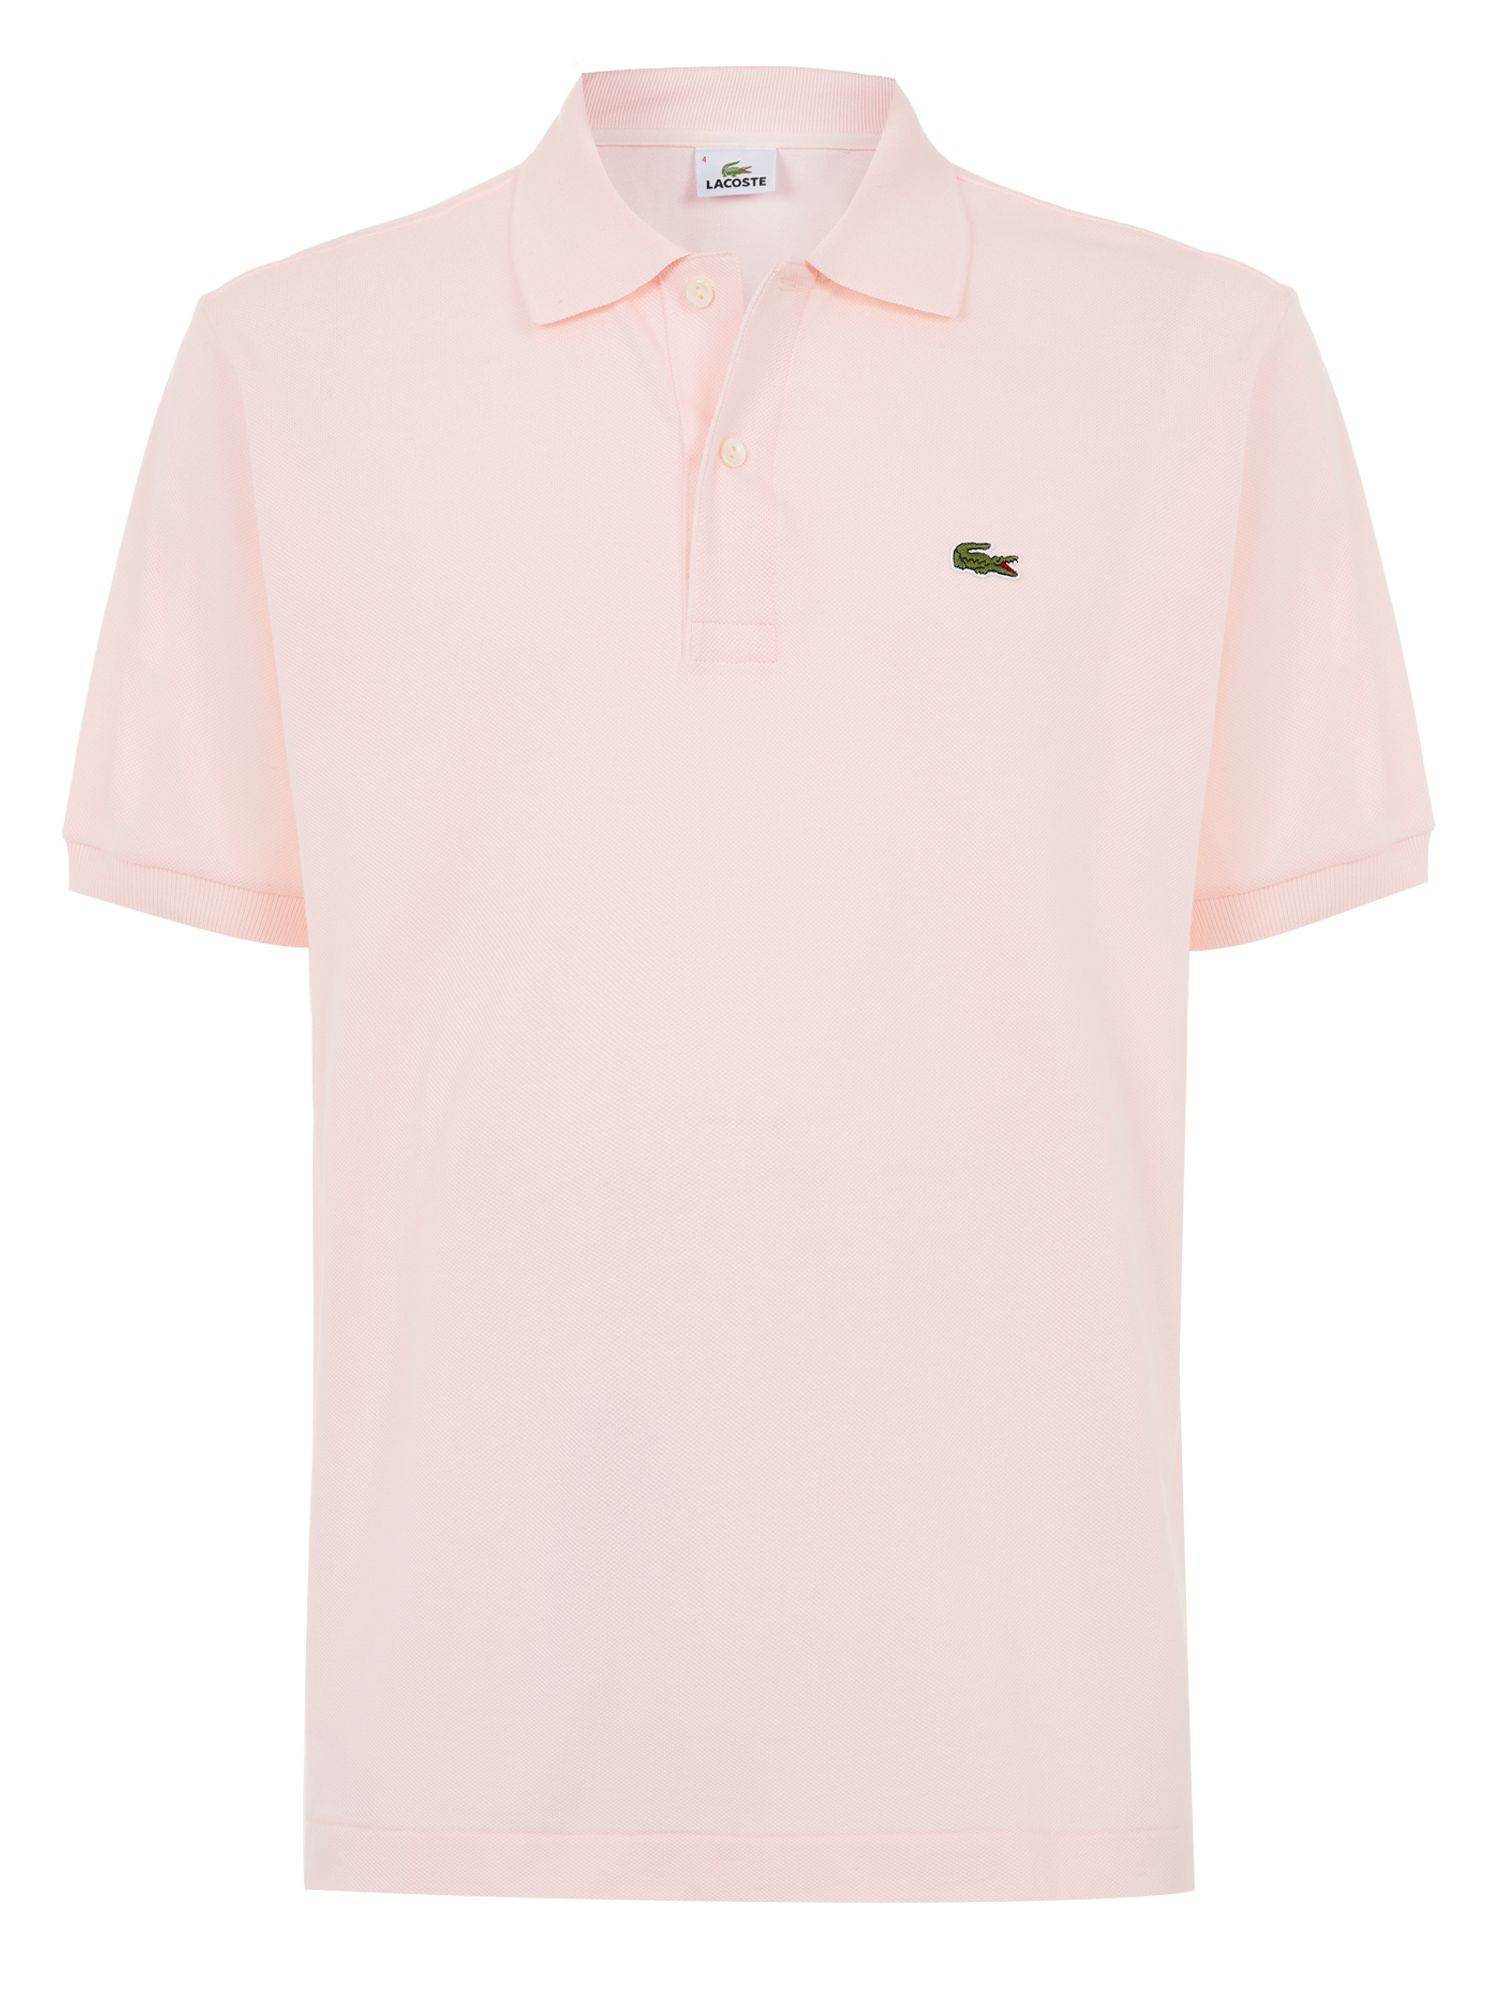 Lacoste Classic L.12.12 Polo Shirt in Pink for Men - Save 30% | Lyst